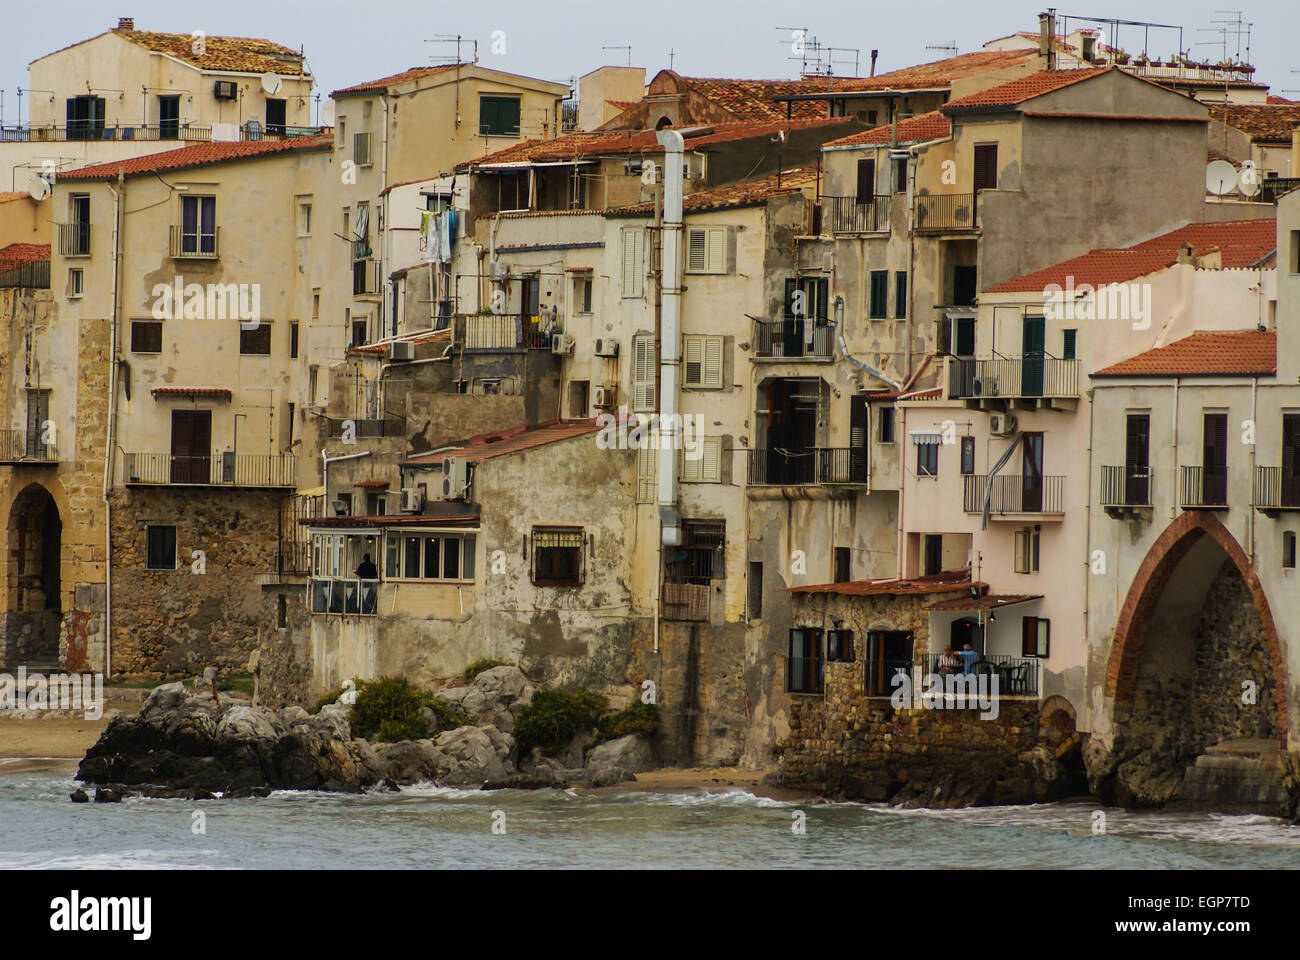 Houses along the shoreline and cathedral in background, Cefalu, Sicily Stock Photo